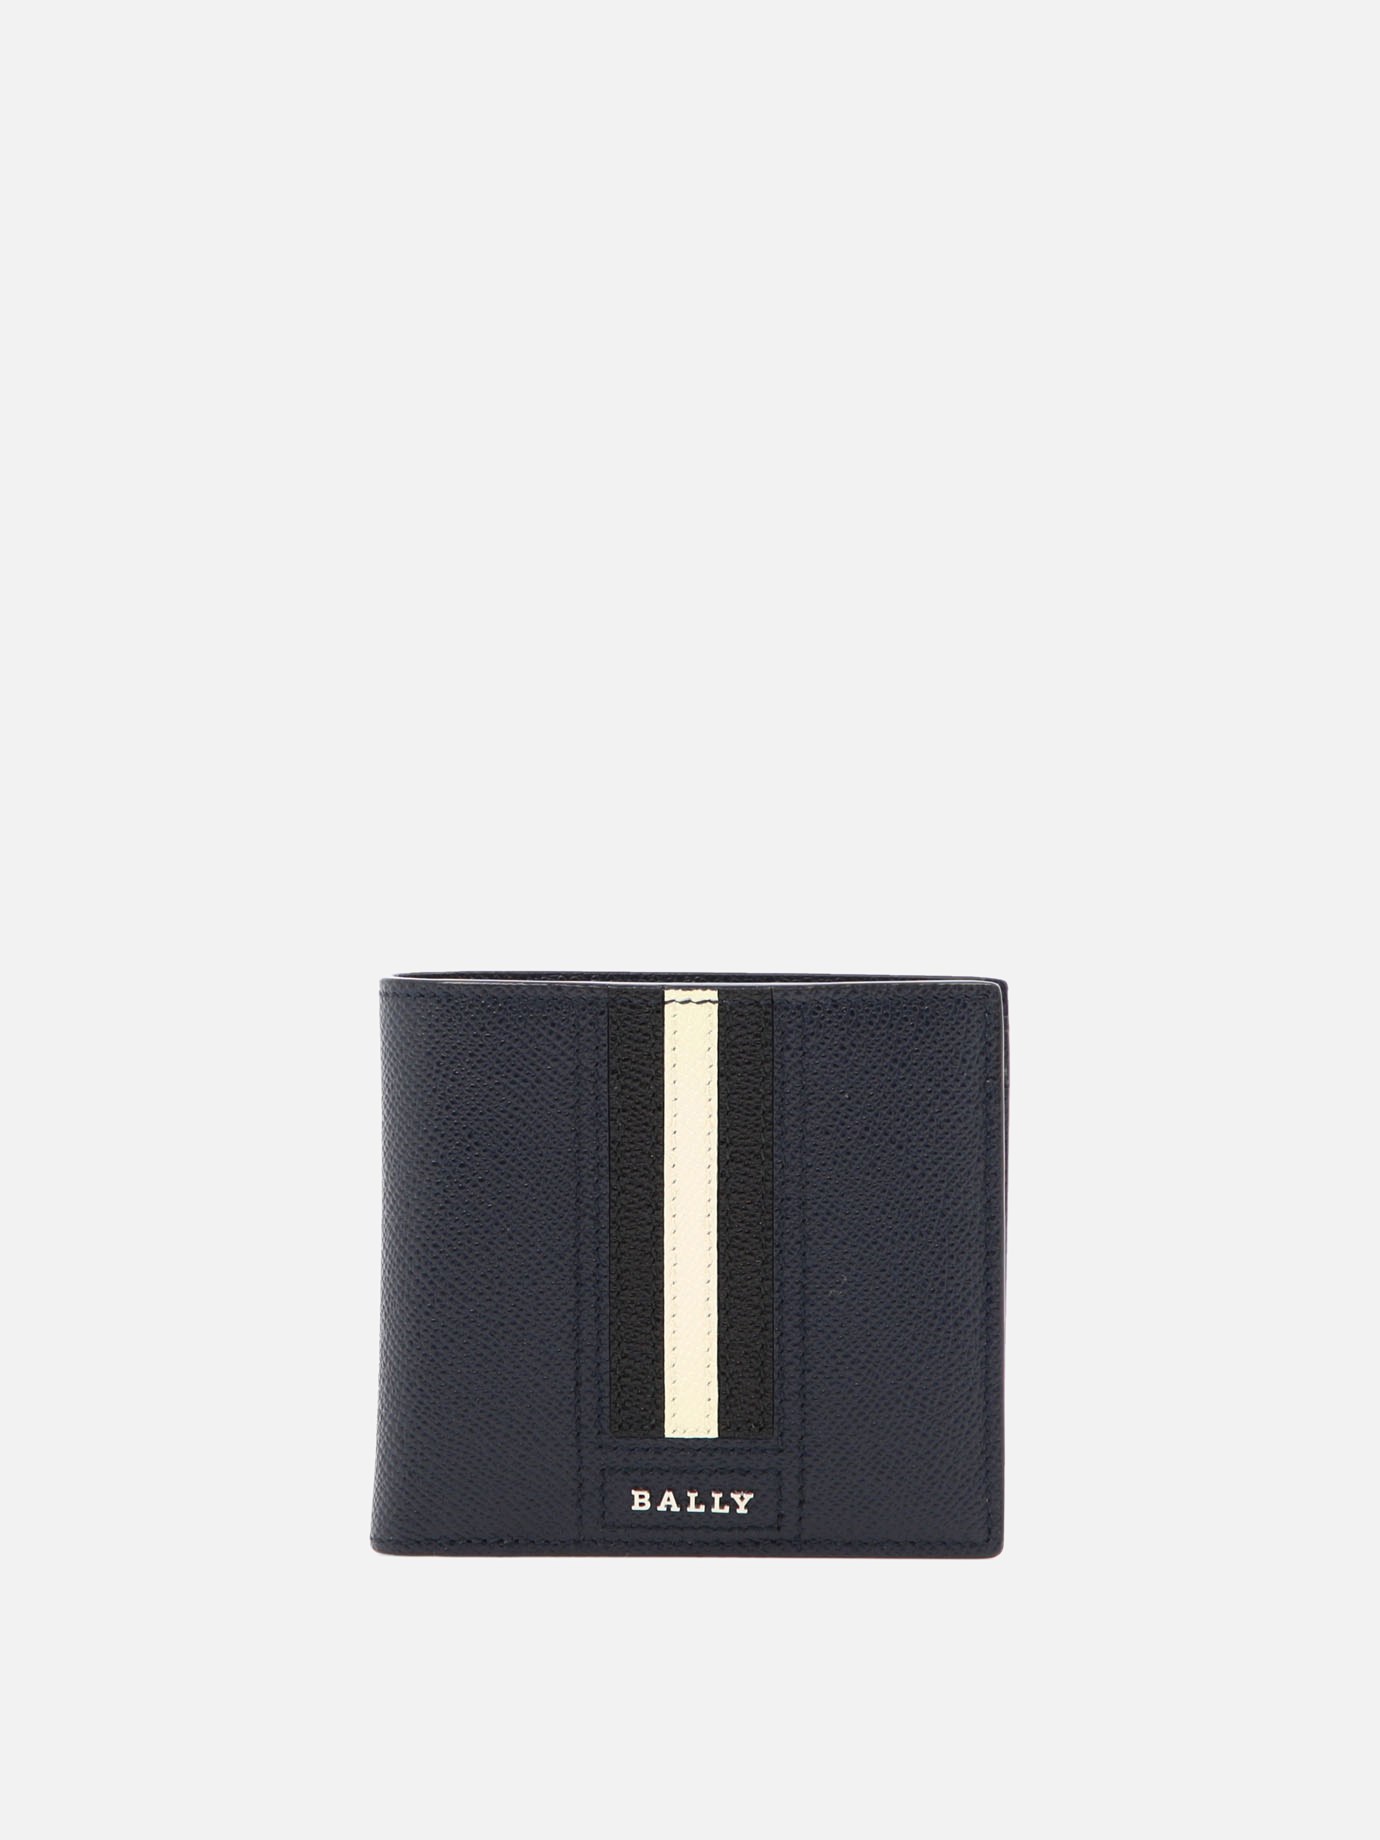  Teisel  walletby Bally - 4